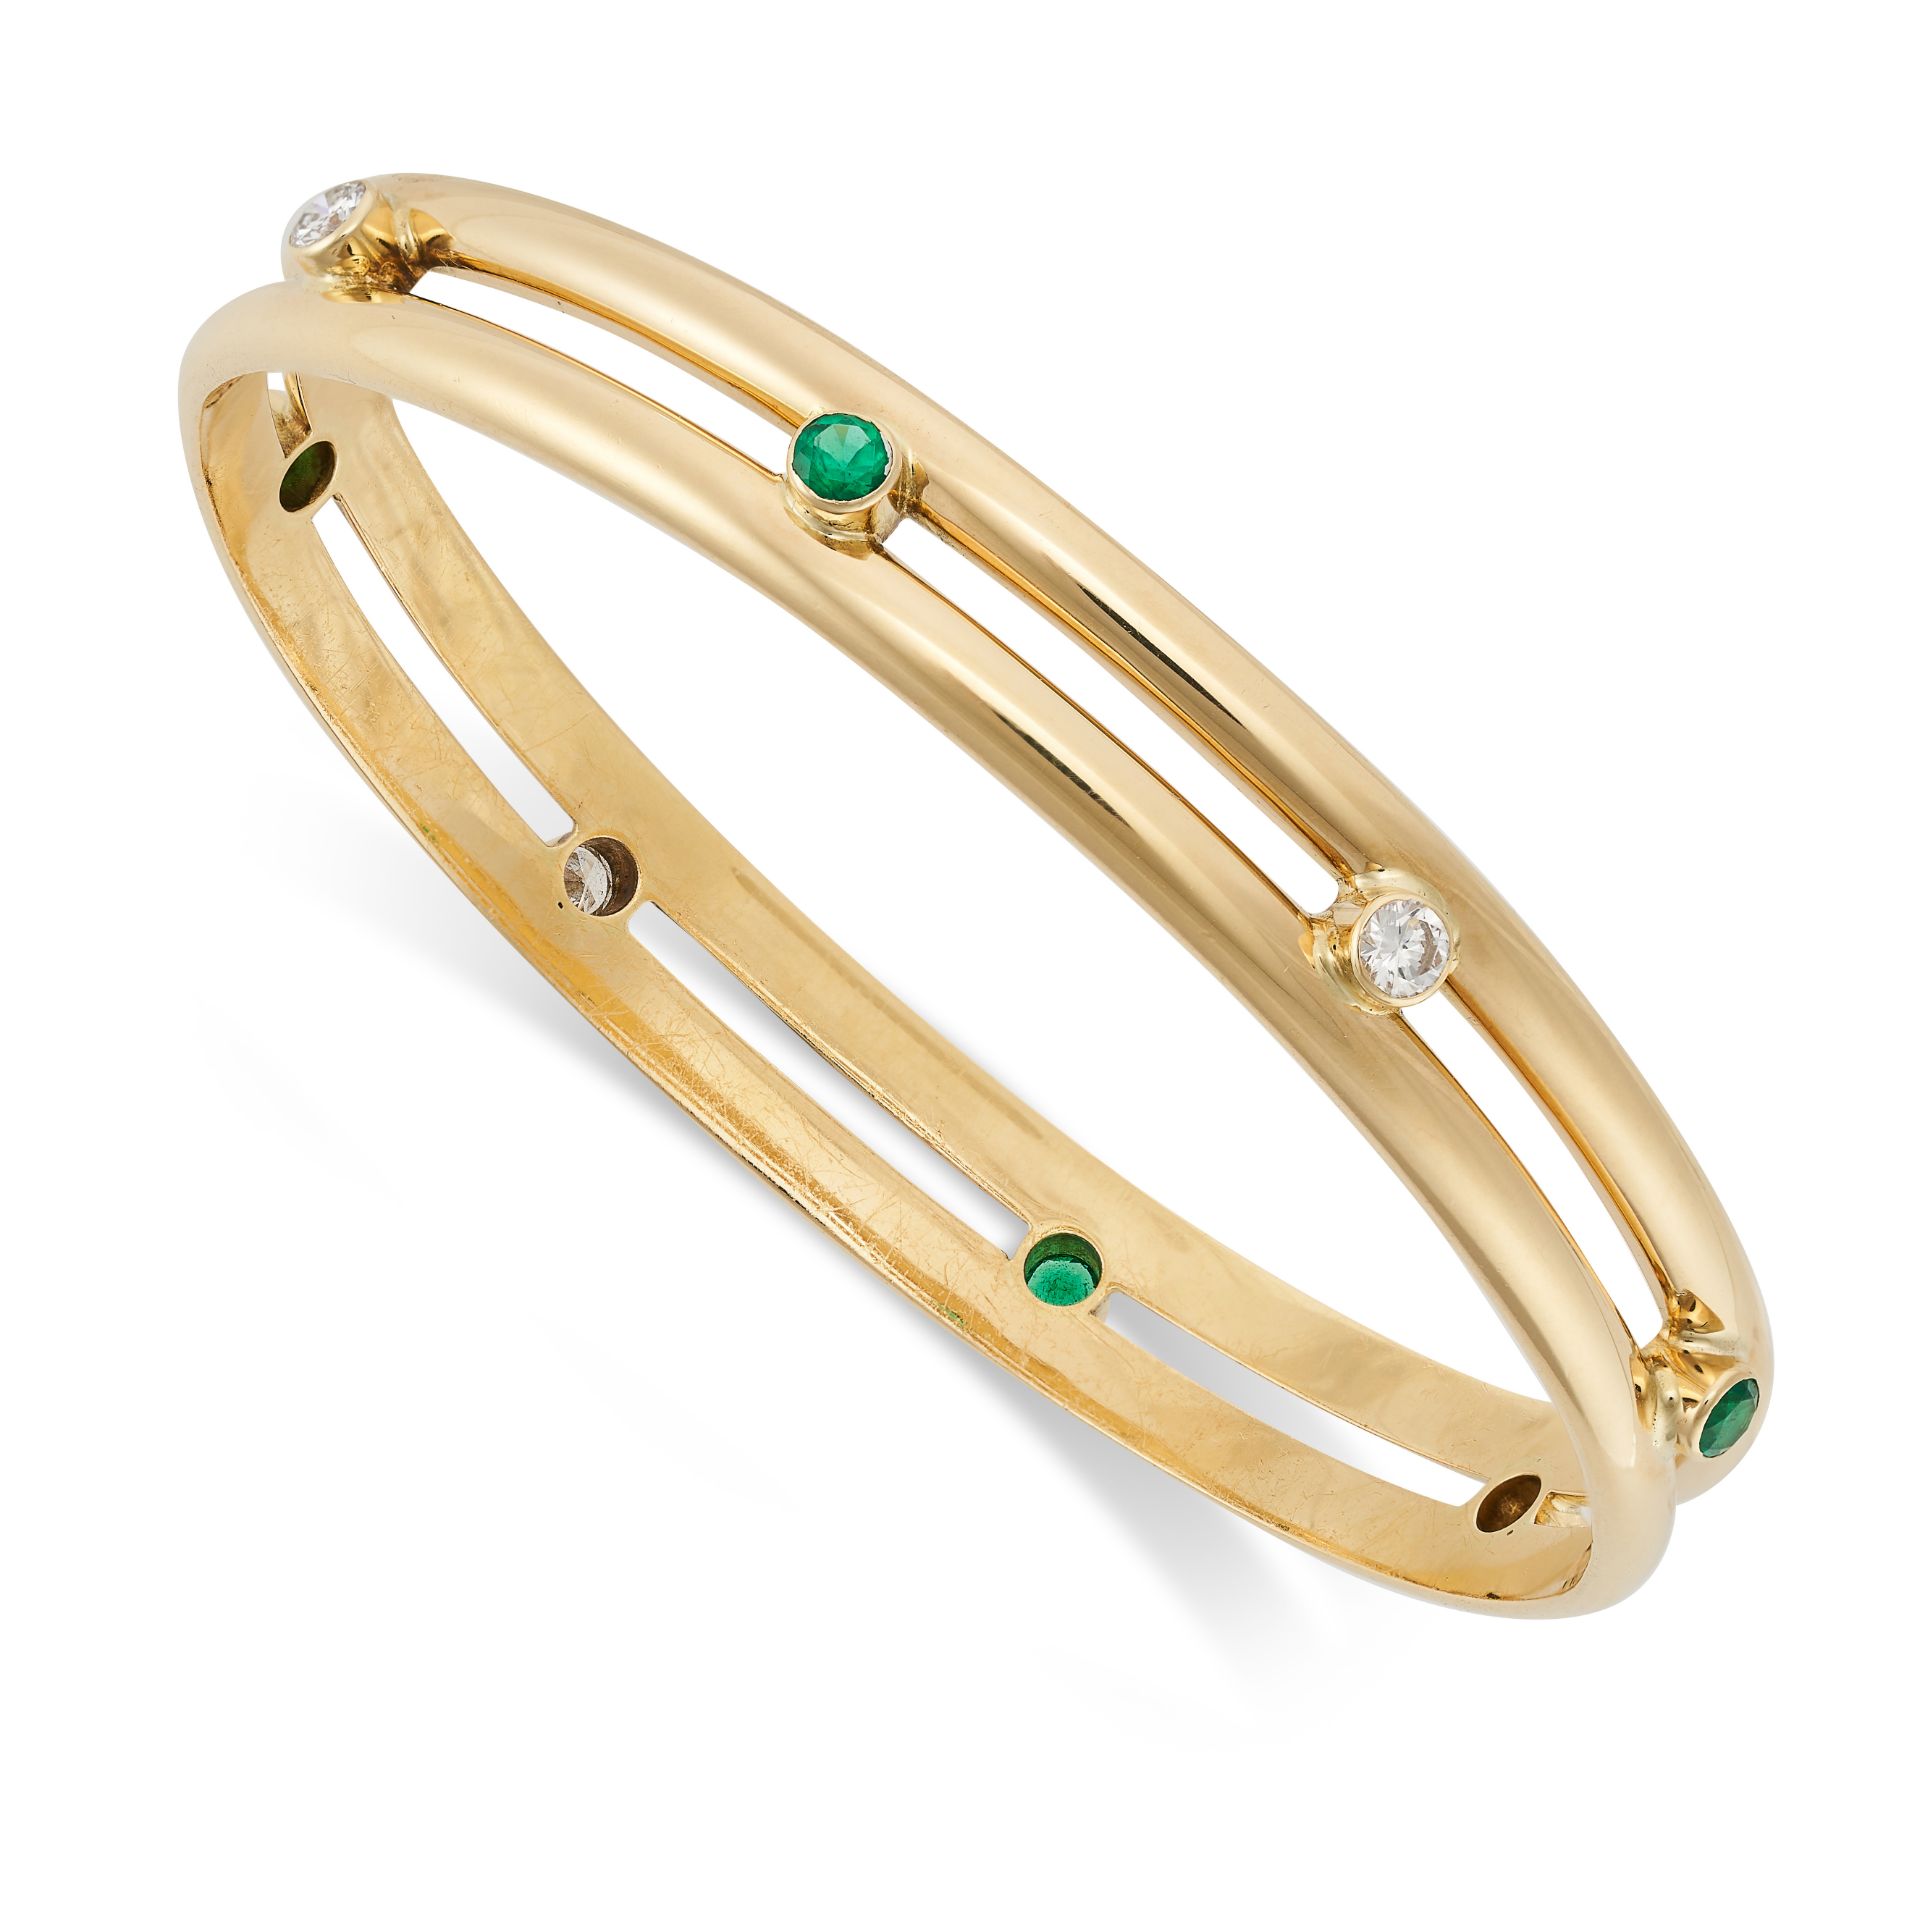 THEO FENNELL, A DIAMOND AND EMERALD BANGLE in 18ct yellow gold, set with a row of alternating